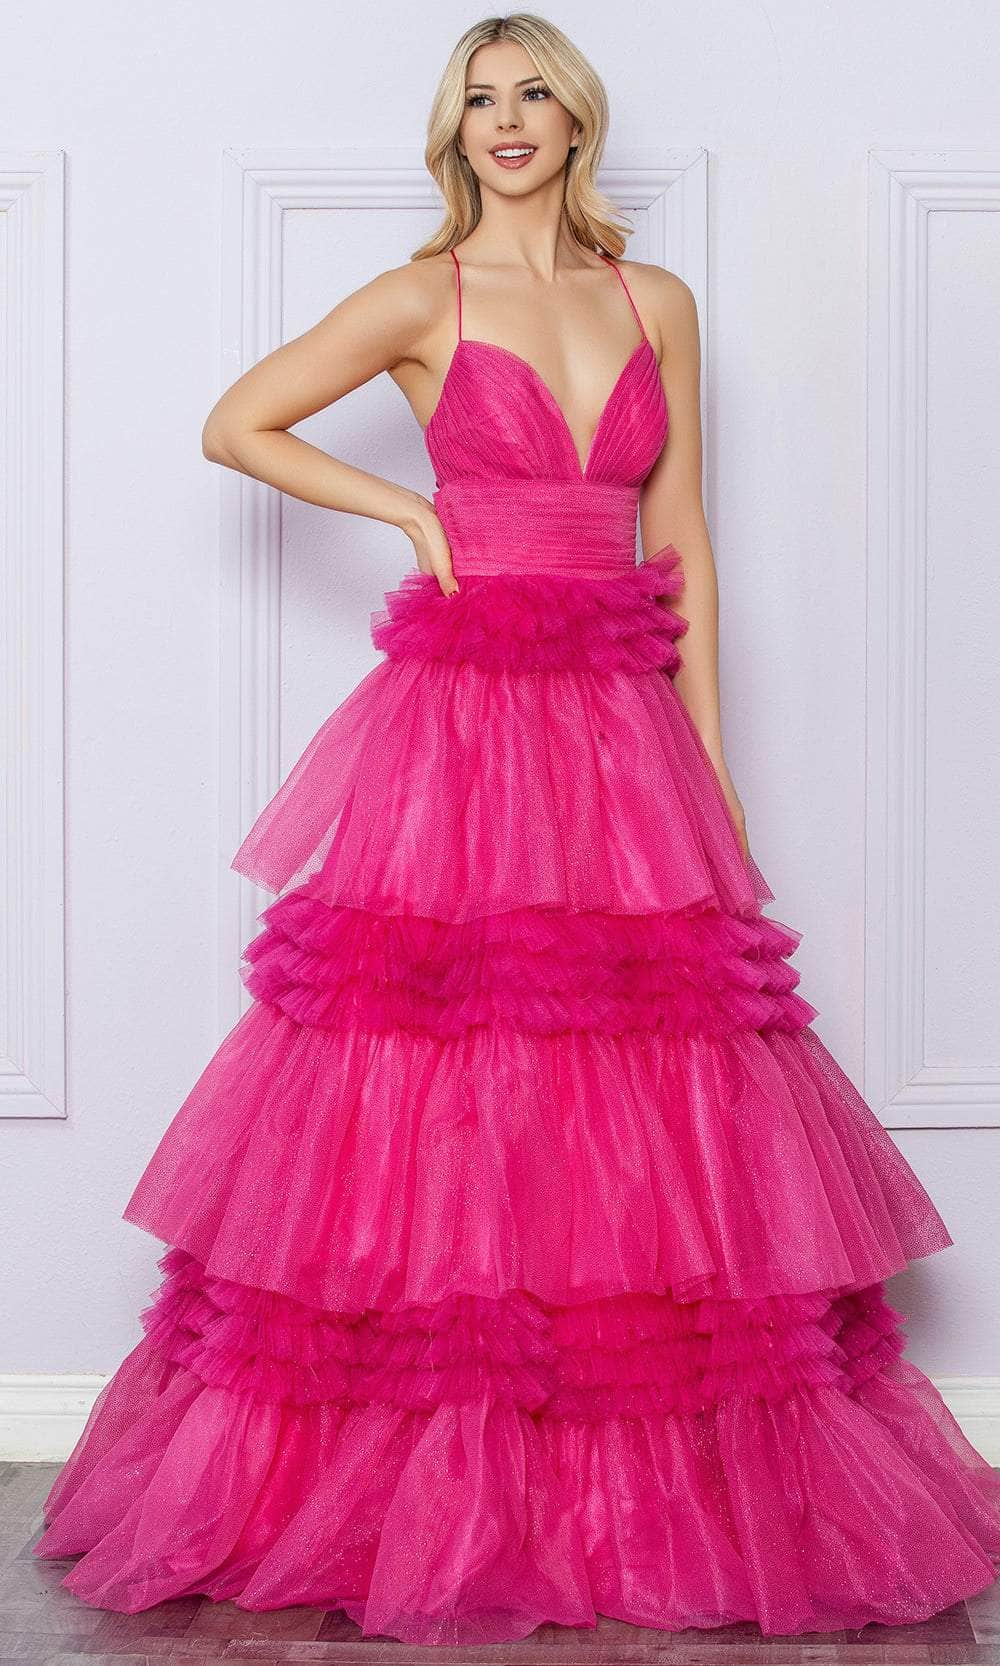 Image of Nox Anabel R1316 - Strappy Back Ruffled Prom Dress